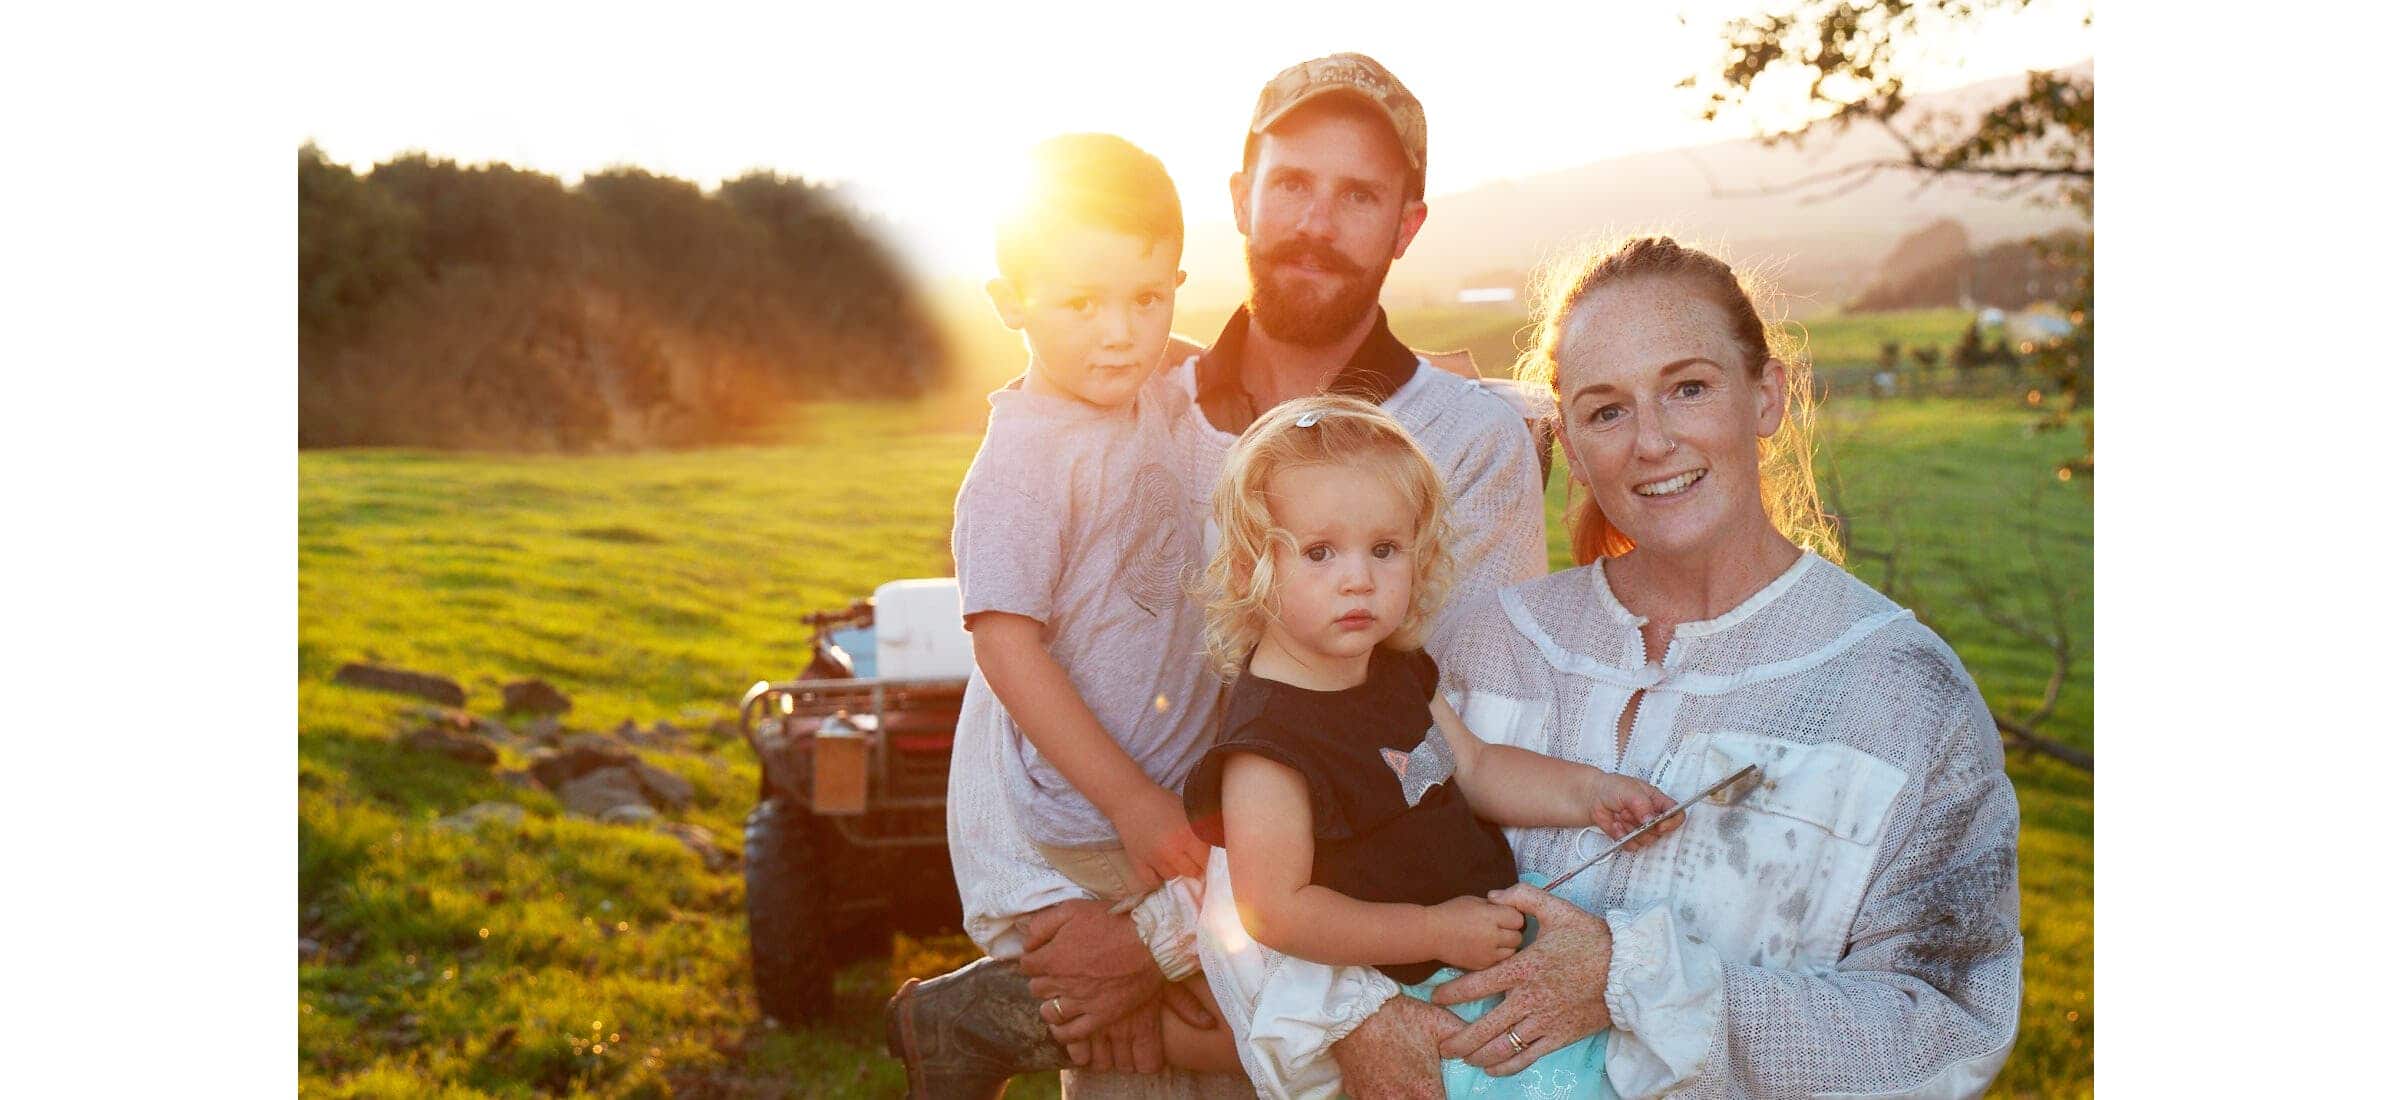 Rory and Hannah O’Brien with their two young children all smiling at the camera  in a field at sunset.